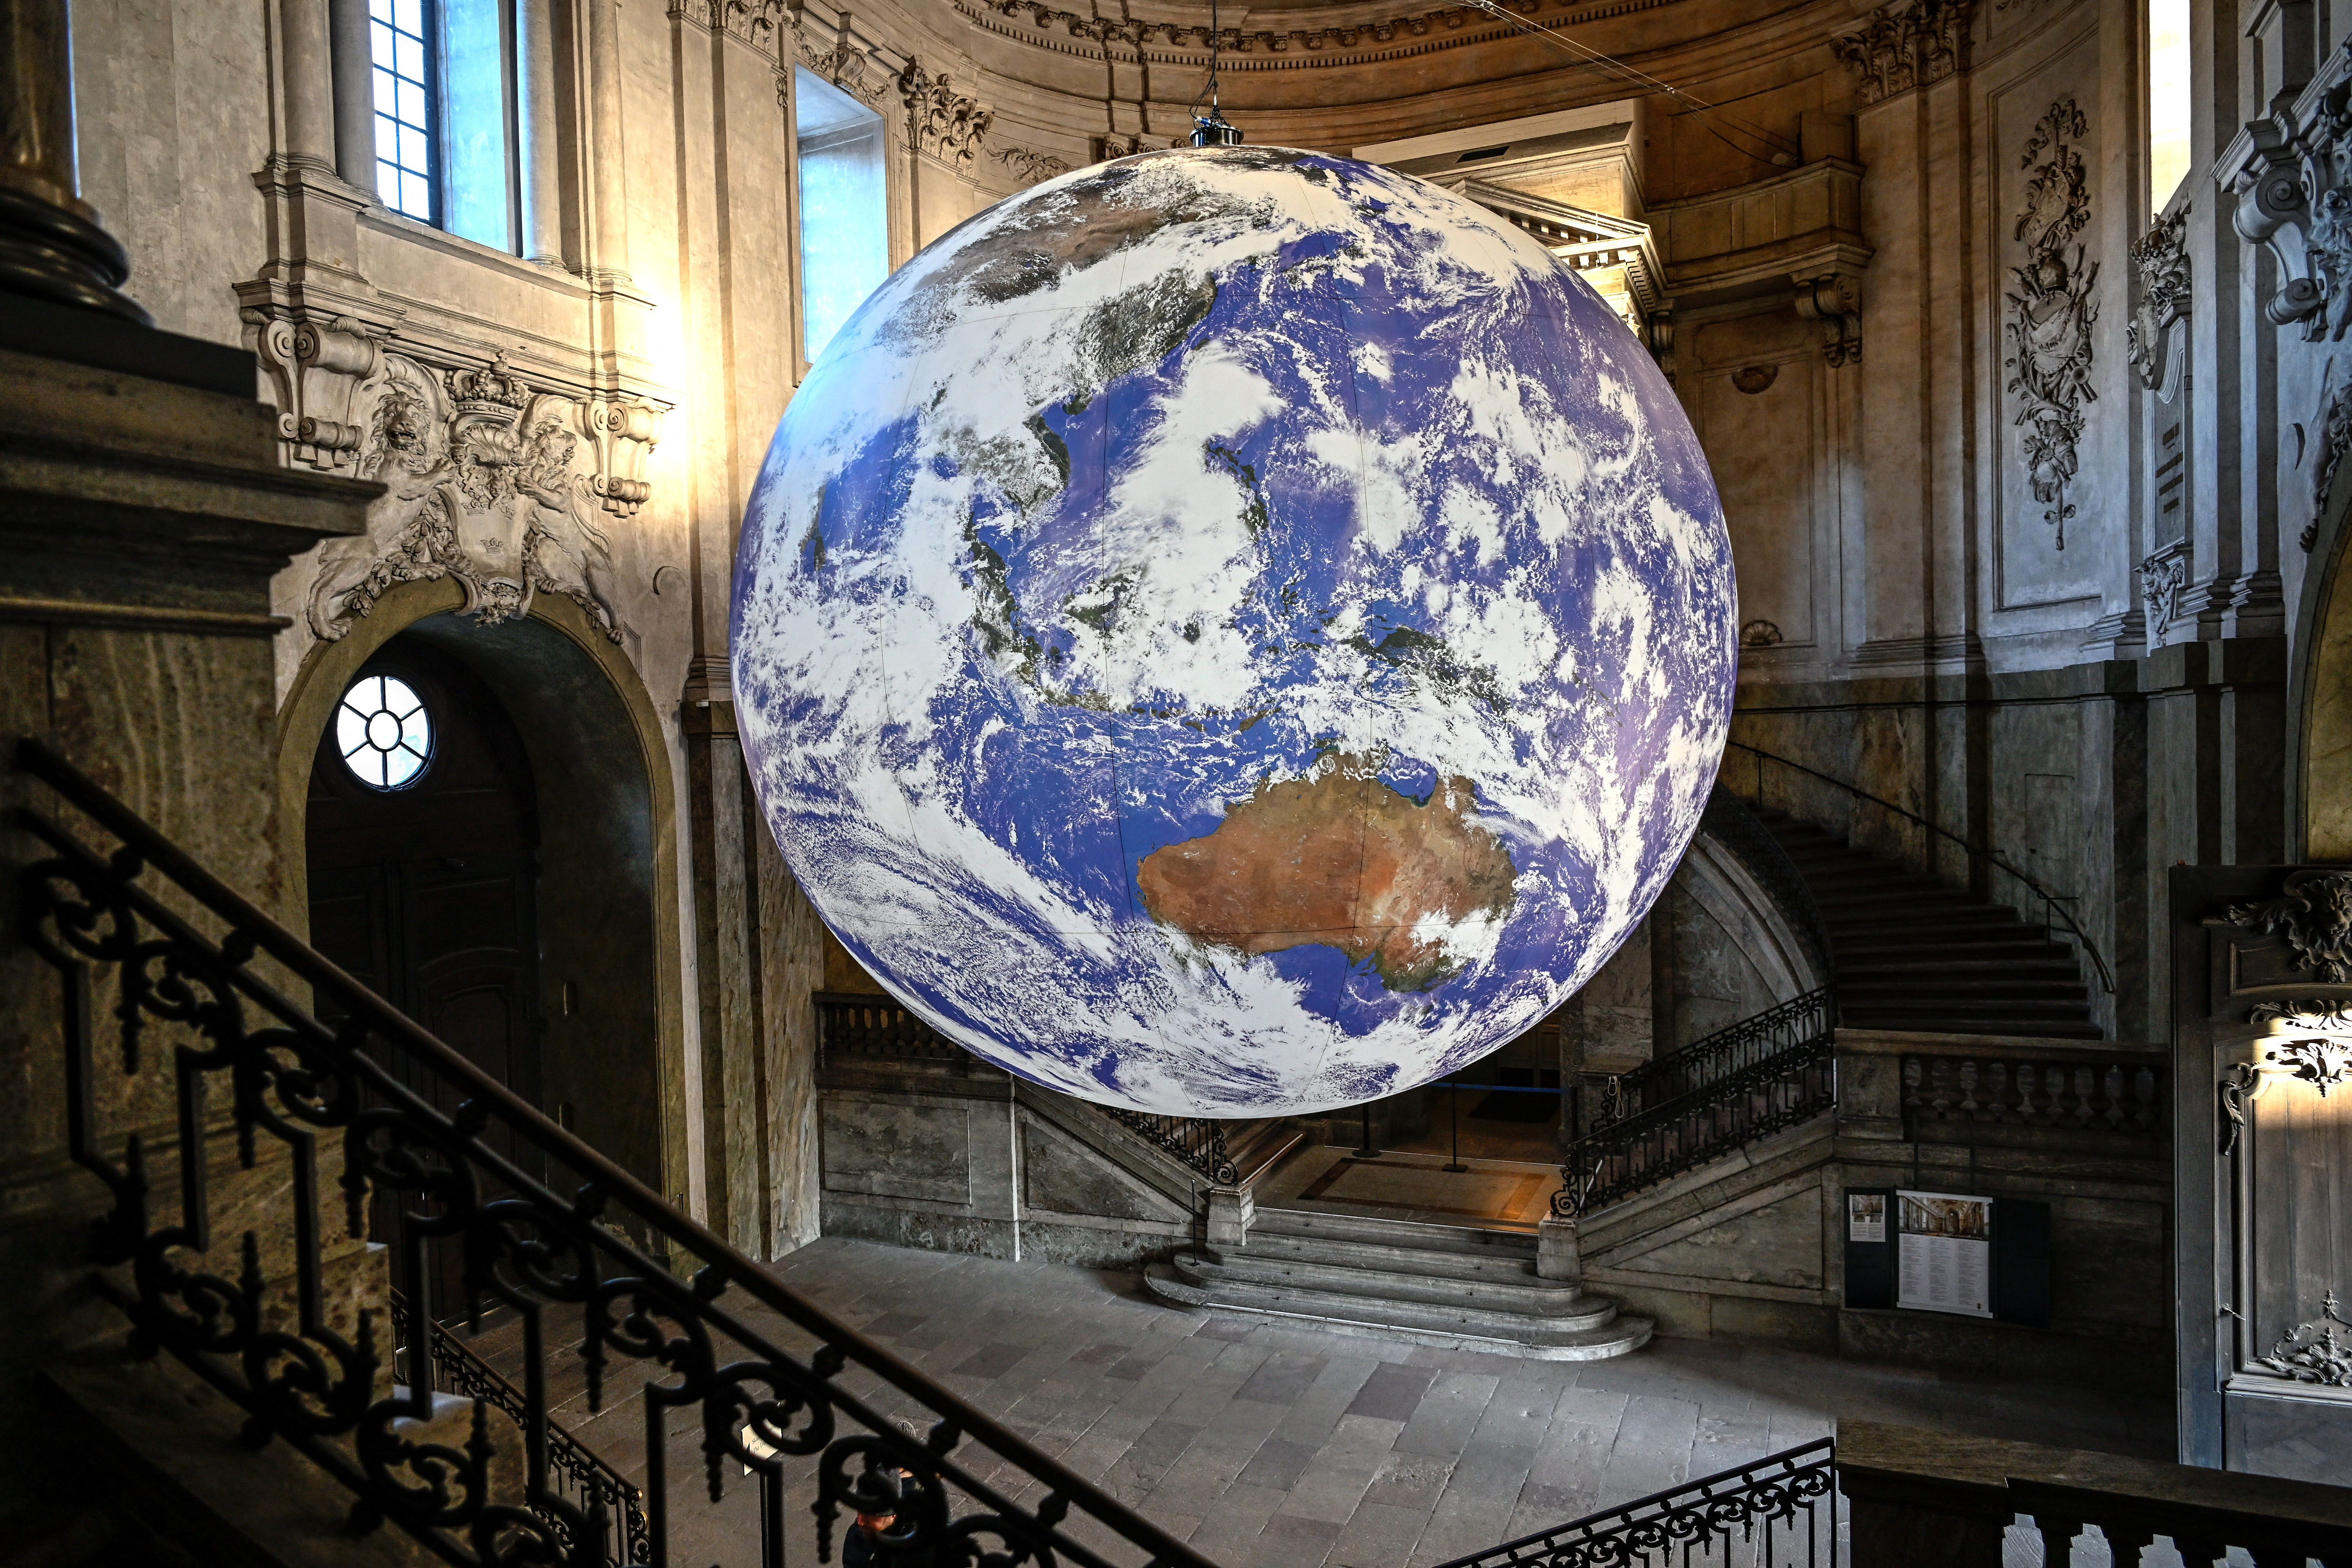 Visitors look at the artwork Gaia, created by artist Luke Jerram, which hangs in the Royal Palace's south vault in Stockholm, Sweden Decemer 8, 2022. Gaia is a globe measuring seven meters in diameter, created from images taken from NASA photographs of the Earth's surface. It is one of 22 works of art that illuminate Stockholm during the "Nobel Week Lights" festival. TT News Agency/Anders Wiklund via REUTERS      ATTENTION EDITORS - THIS IMAGE WAS PROVIDED BY A THIRD PARTY. SWEDEN OUT. NO COMMERCIAL OR EDITORIAL SALES IN SWEDEN.